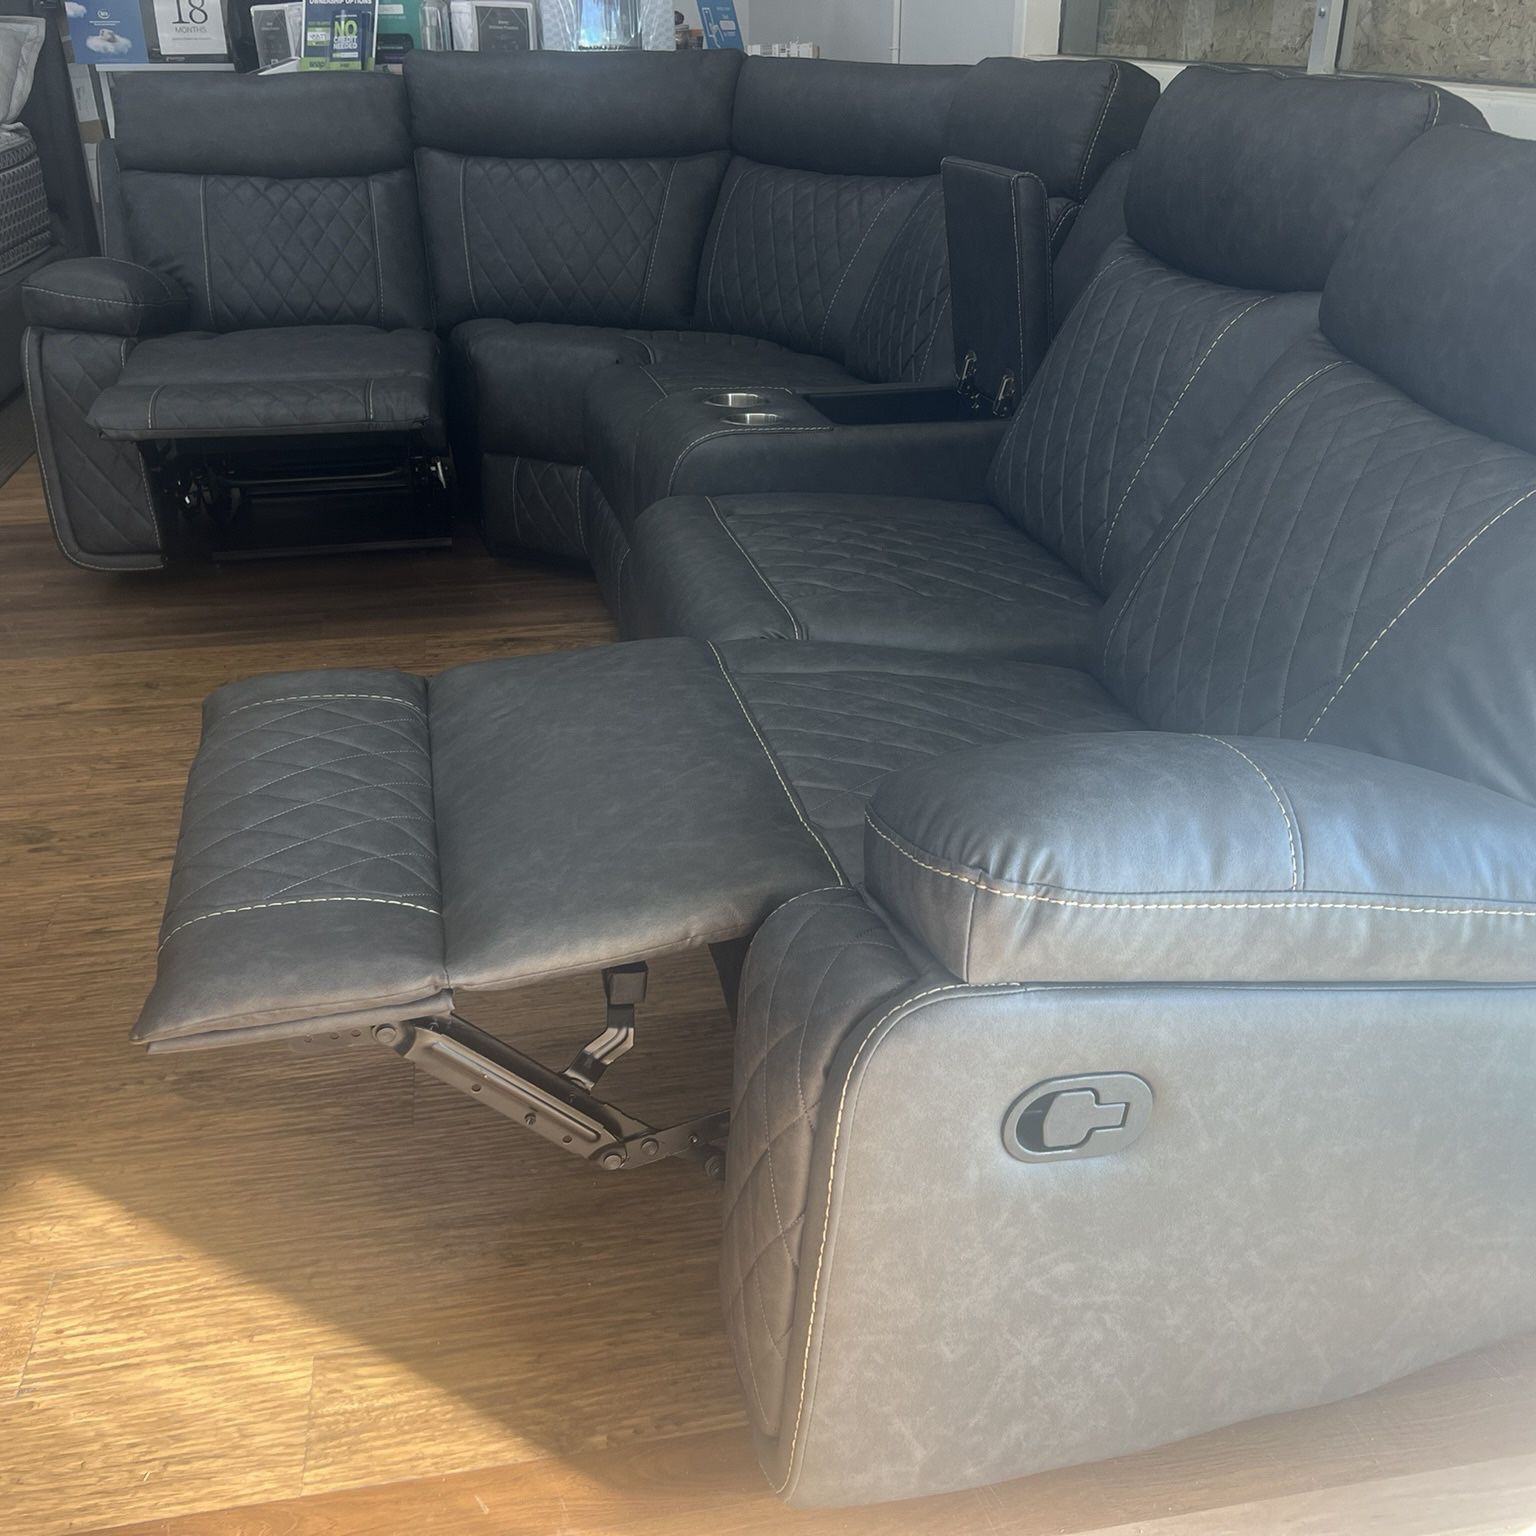 🛋️NEW!! In BOX 📦 BARGAIN 3 Breathable Recliner Sectional